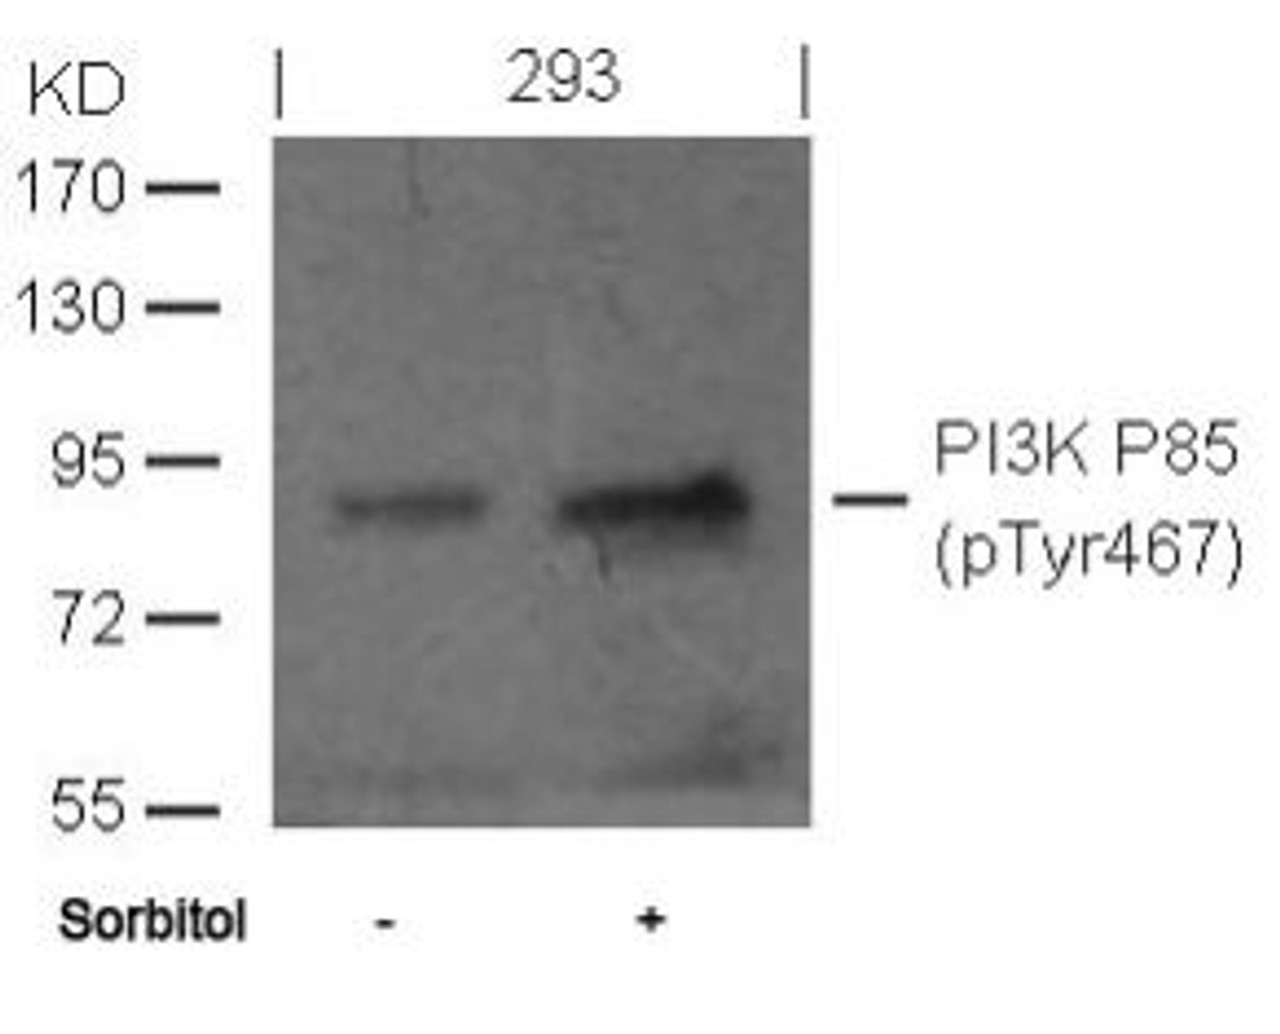 Western blot analysis of lysed extracts from 293 cells untreated or treated with sorbitol using PI3K P85 (phospho-Tyr467) .